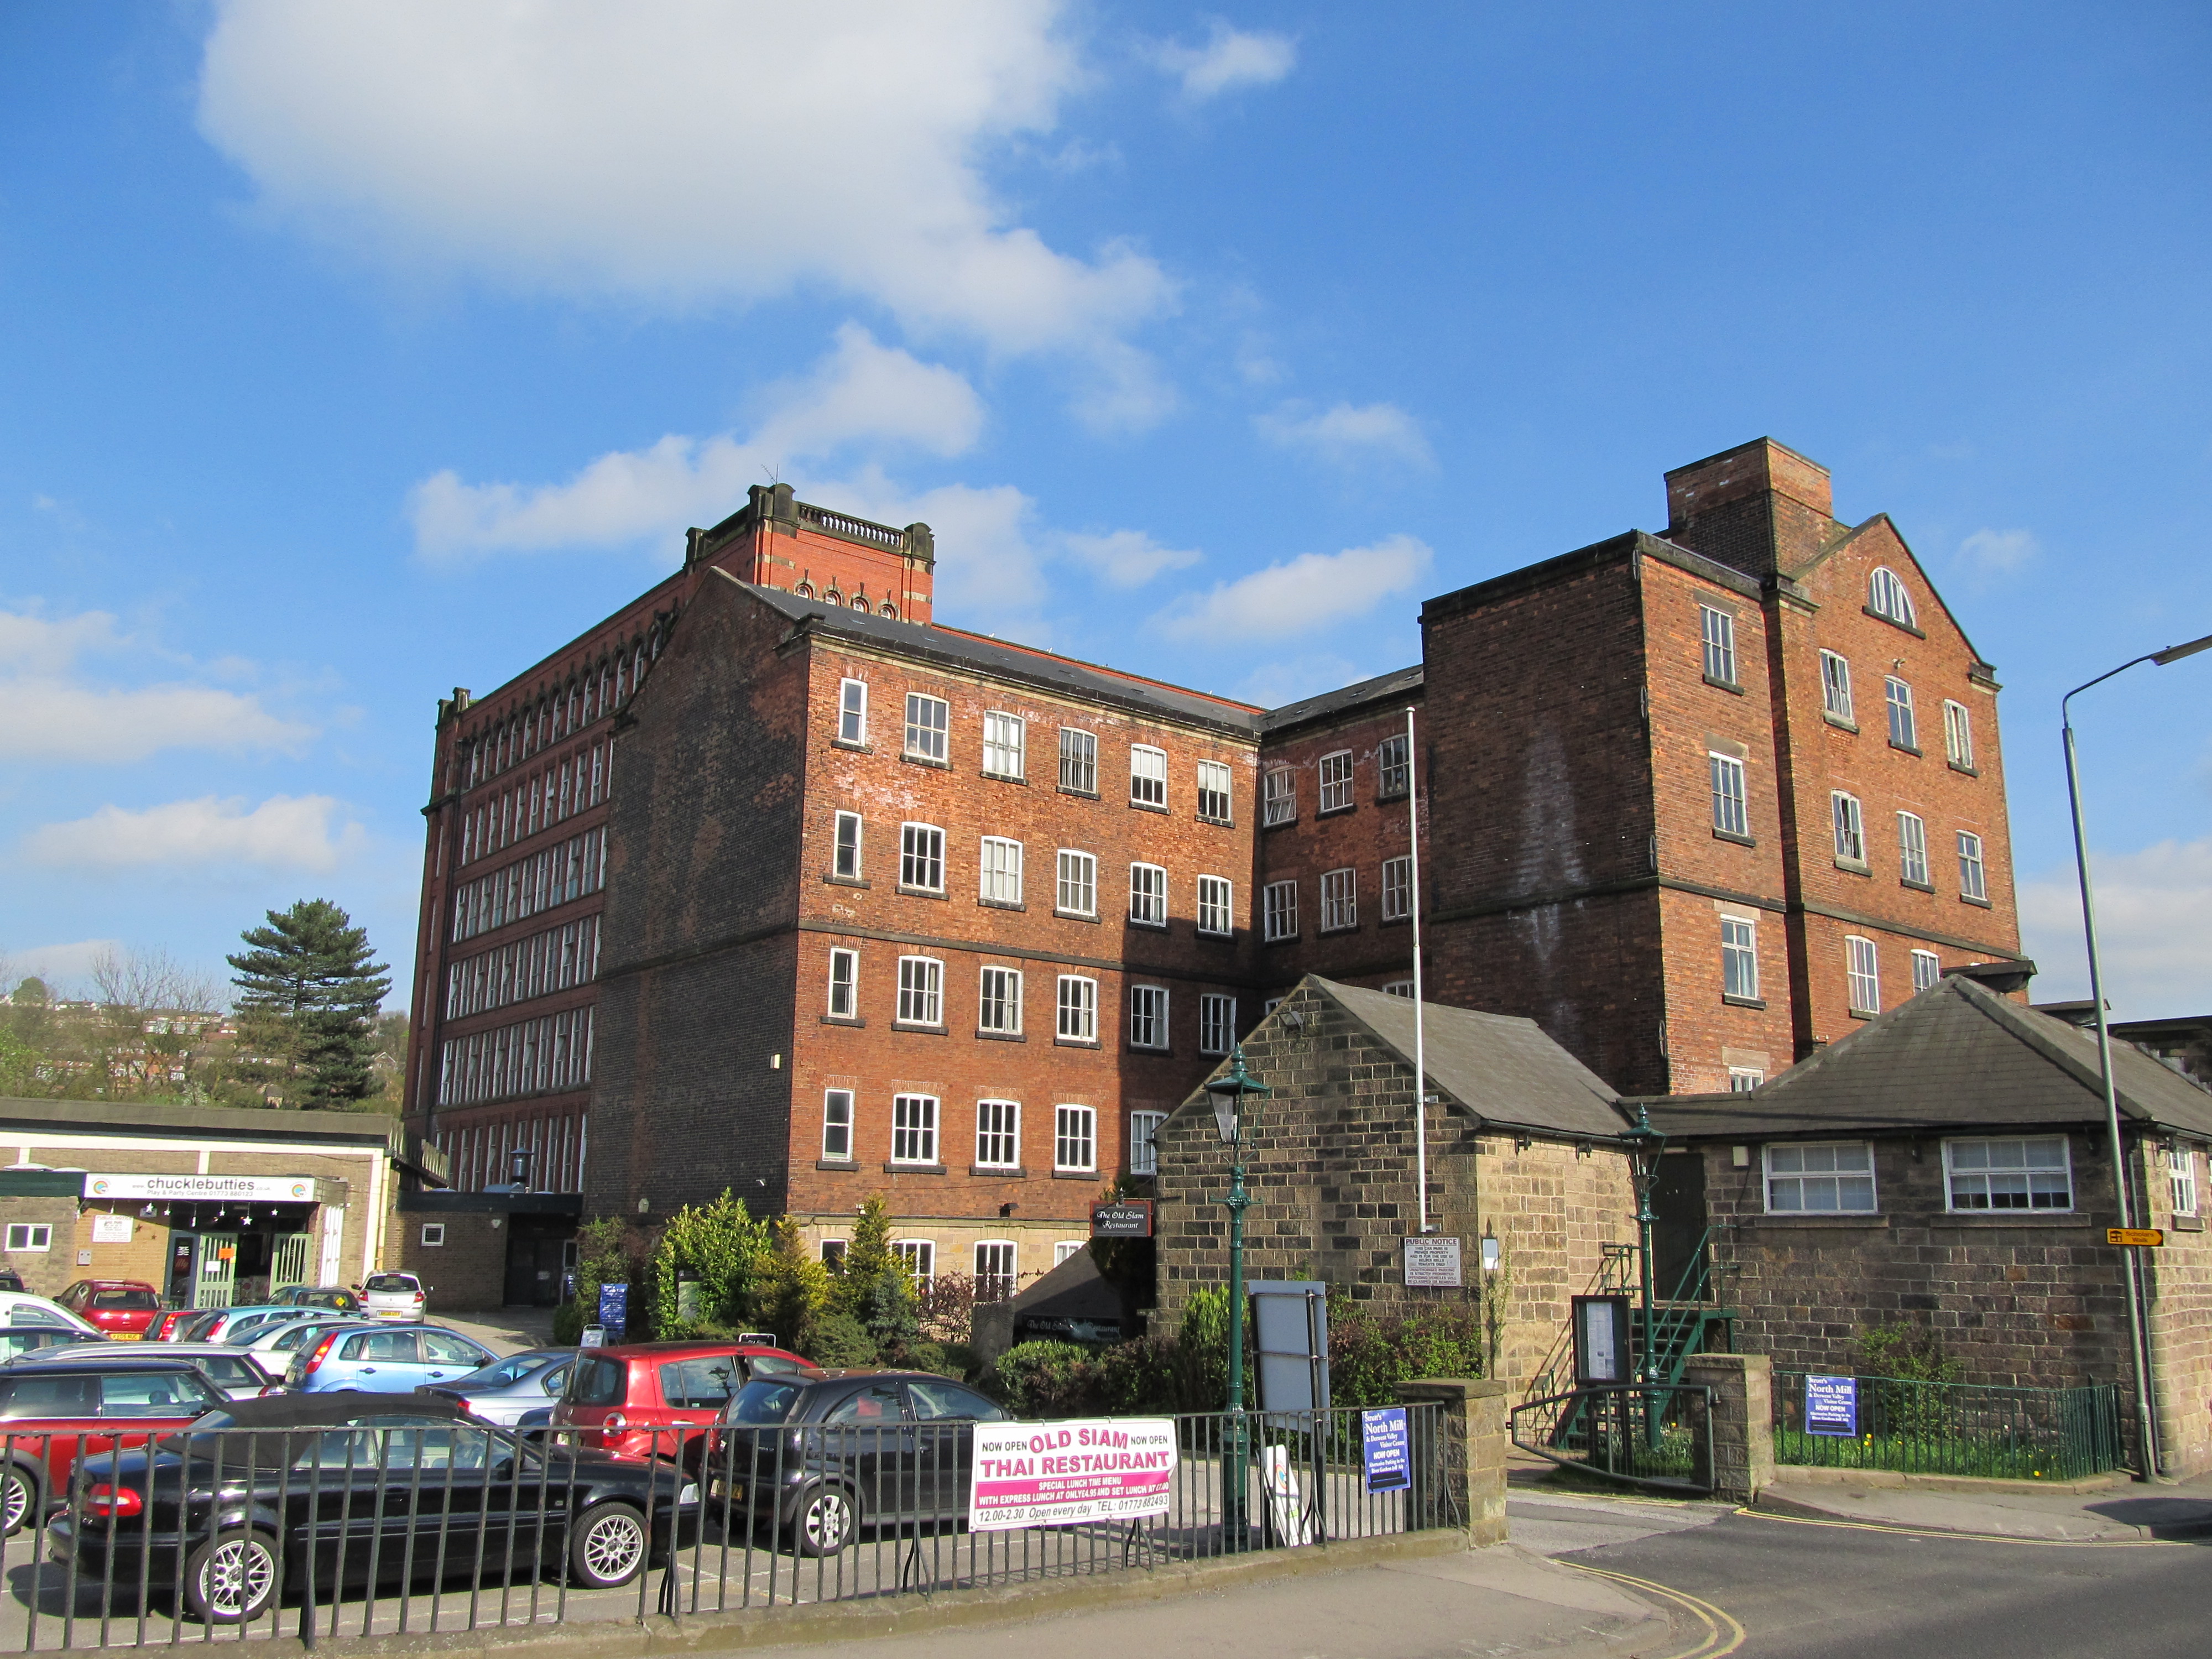 North Mill, Belper, built with iron frame as developed by Charles Woolley Bage